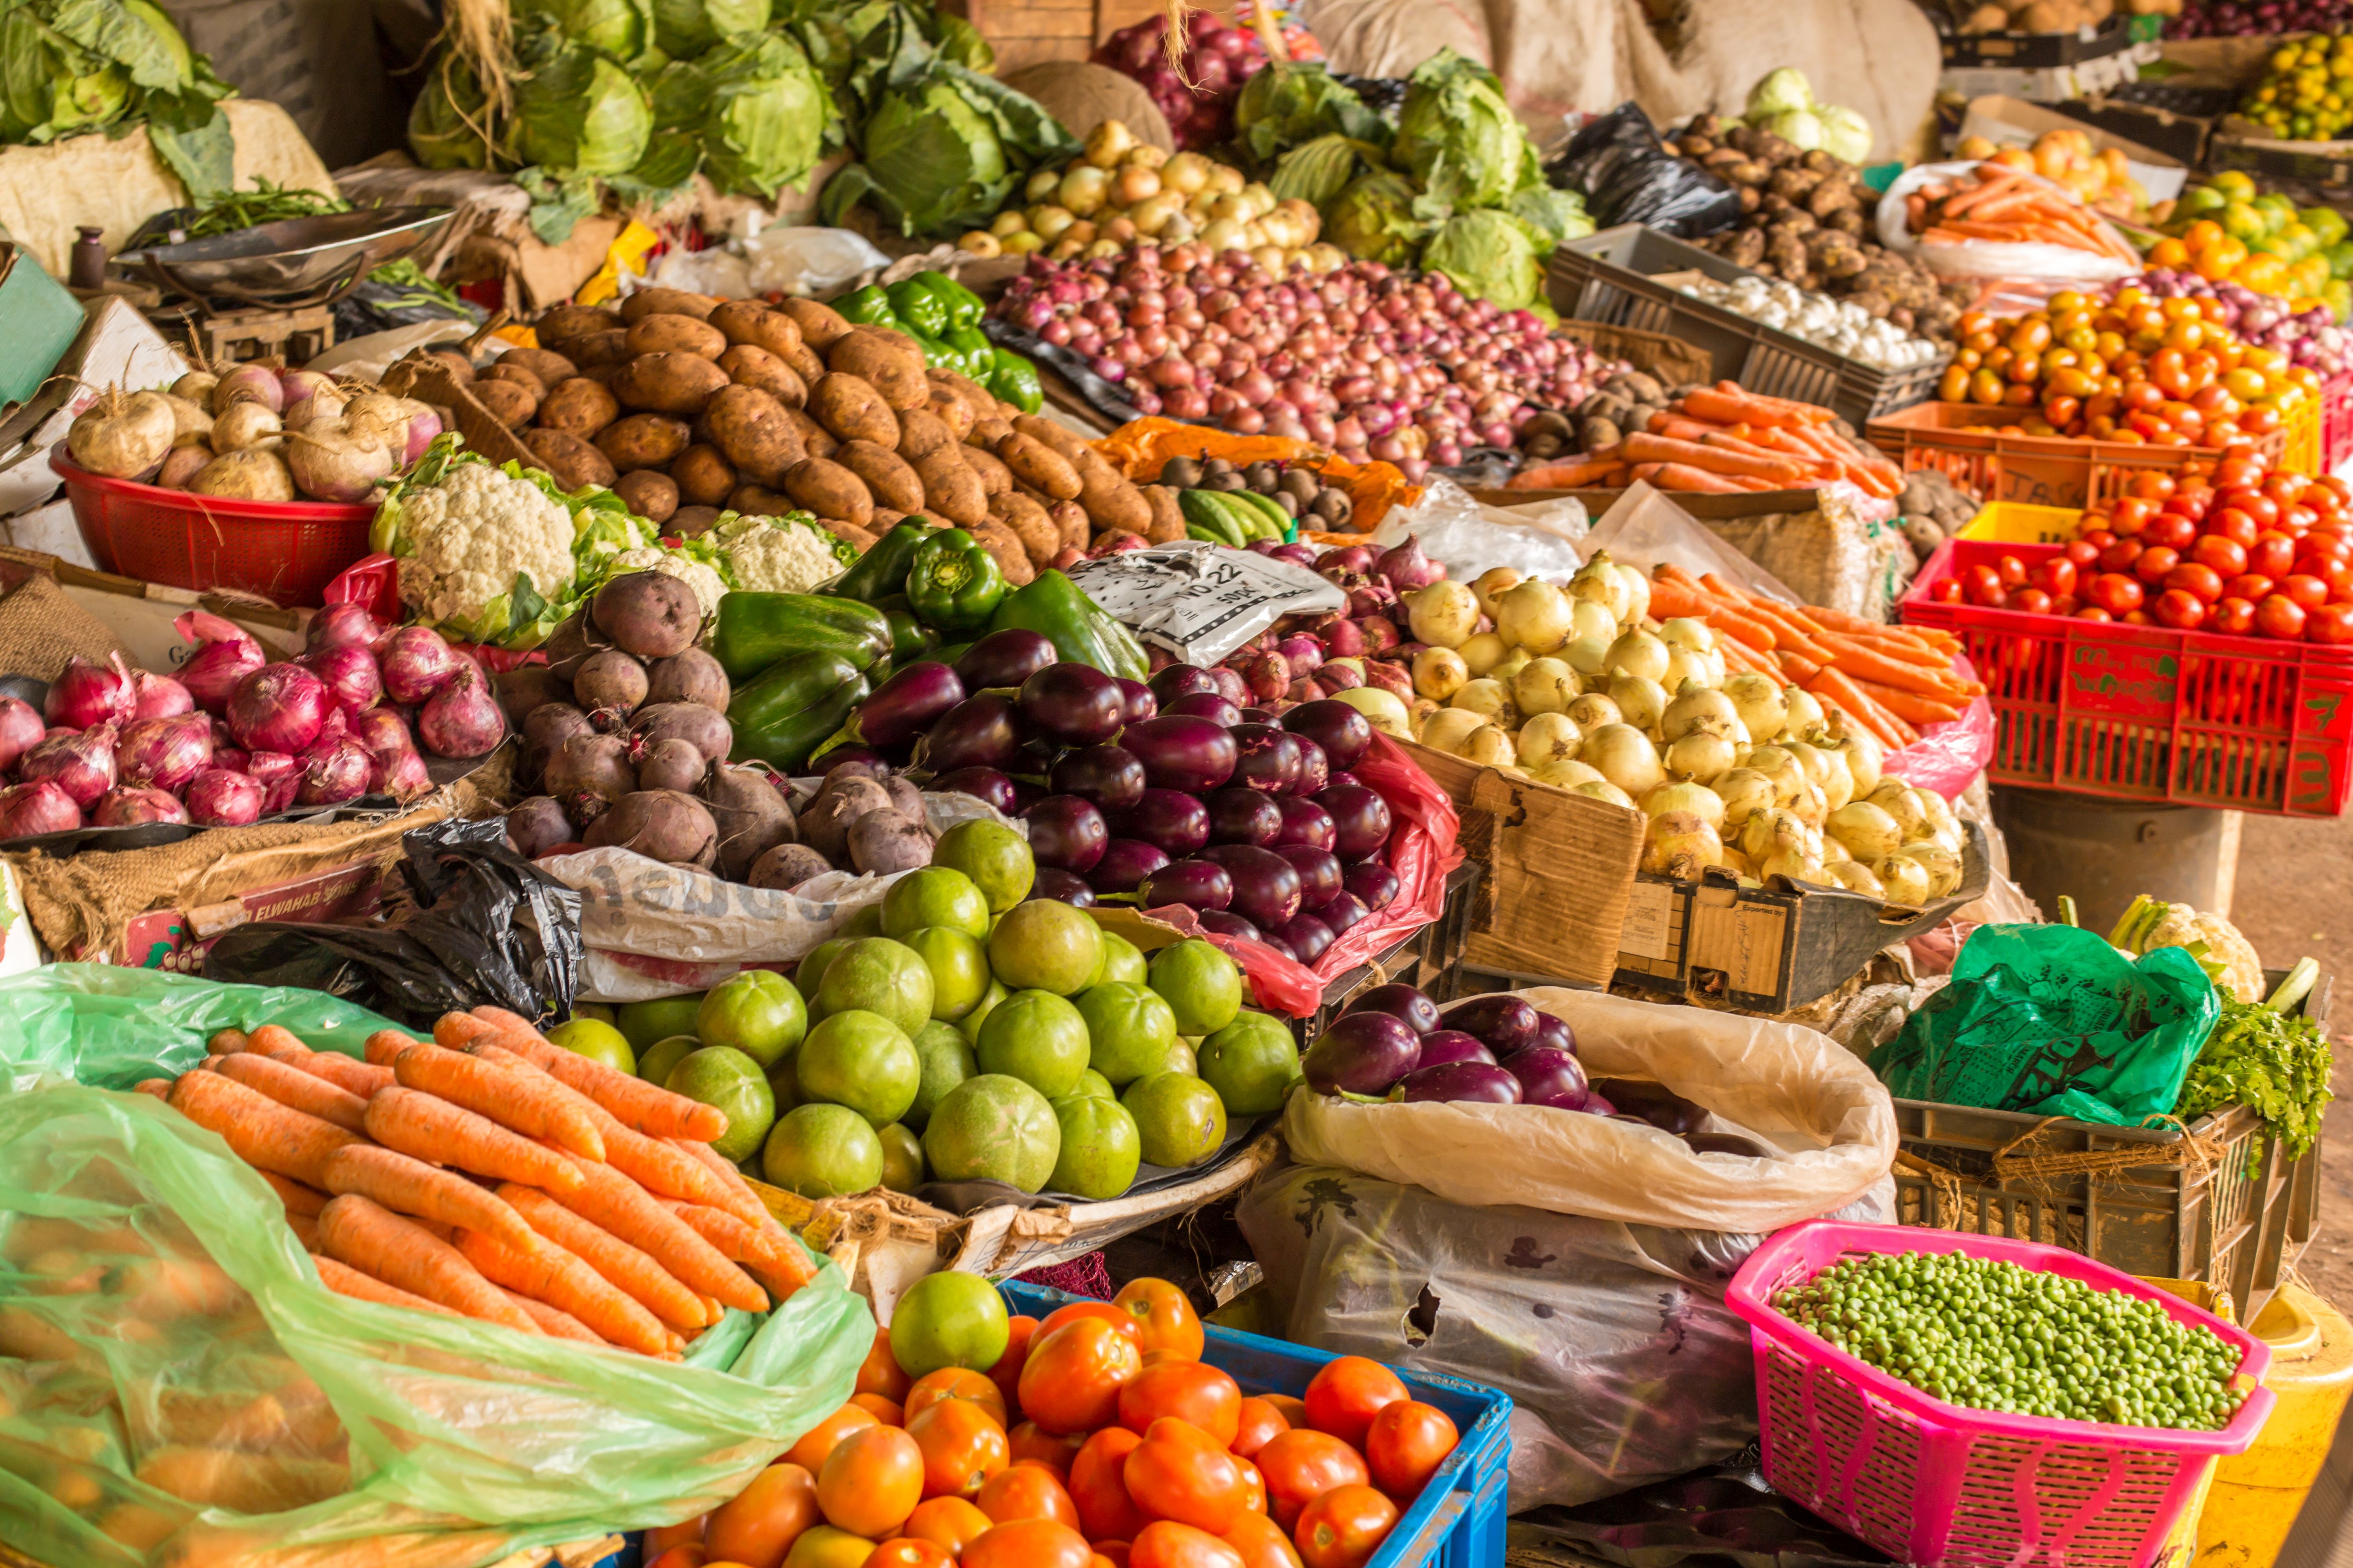 Colorful fruits and vegetables colorfully arranged at a local fruit and vegetable market in Nairobi, Kenya